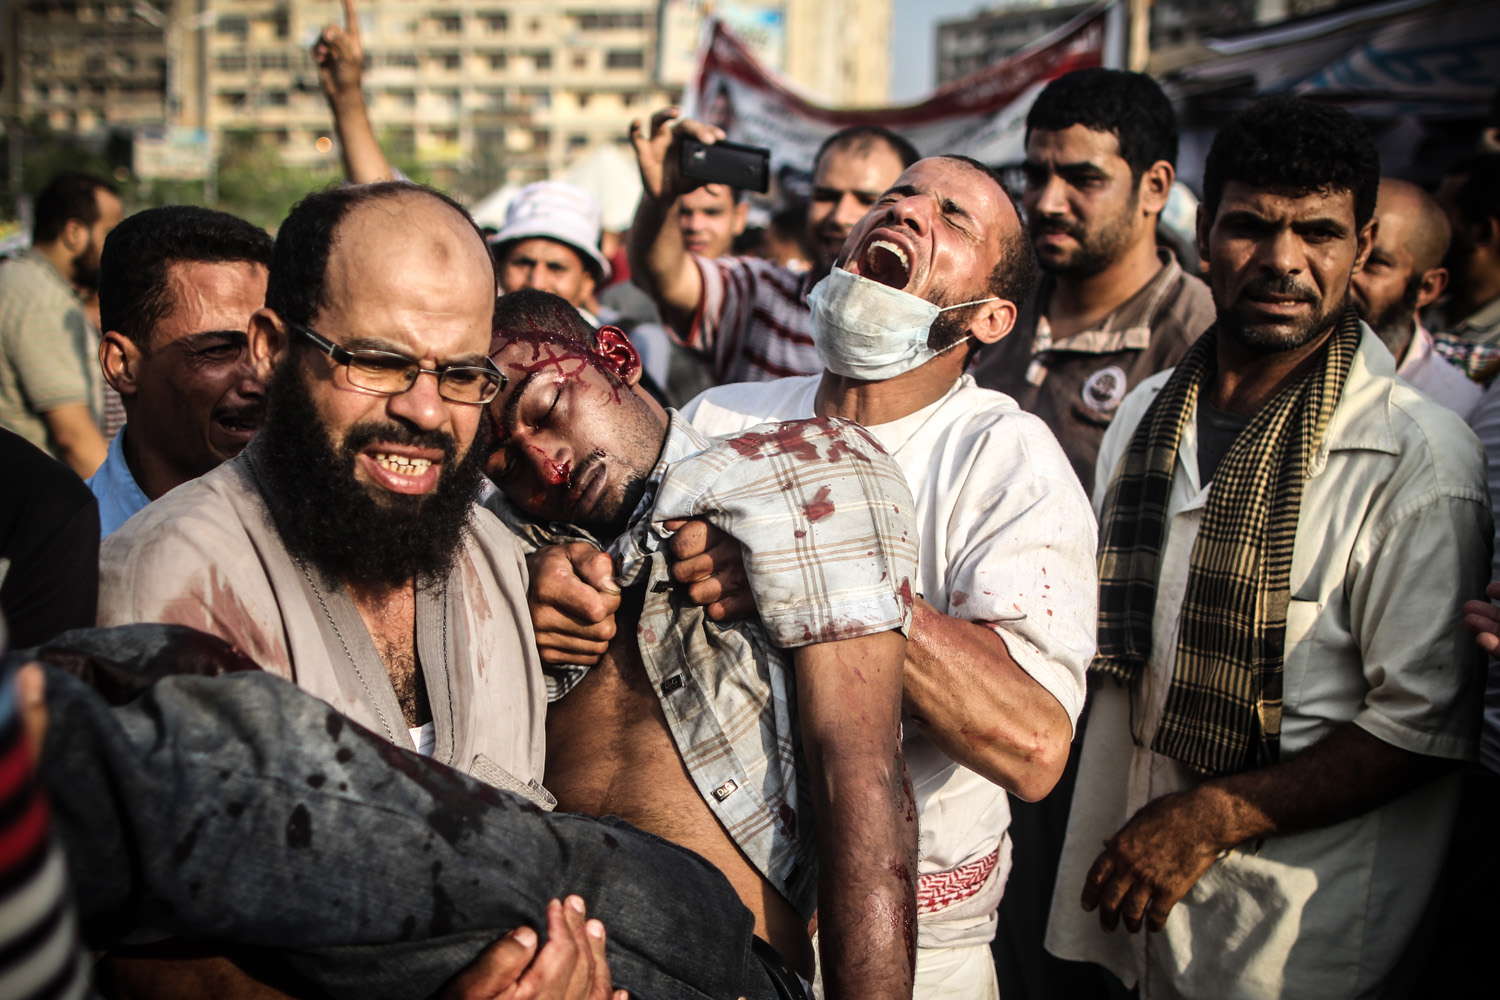 Morsi supporters scream as they carry a man shot in the head outside the makeshift hospital in Rabaa Square.